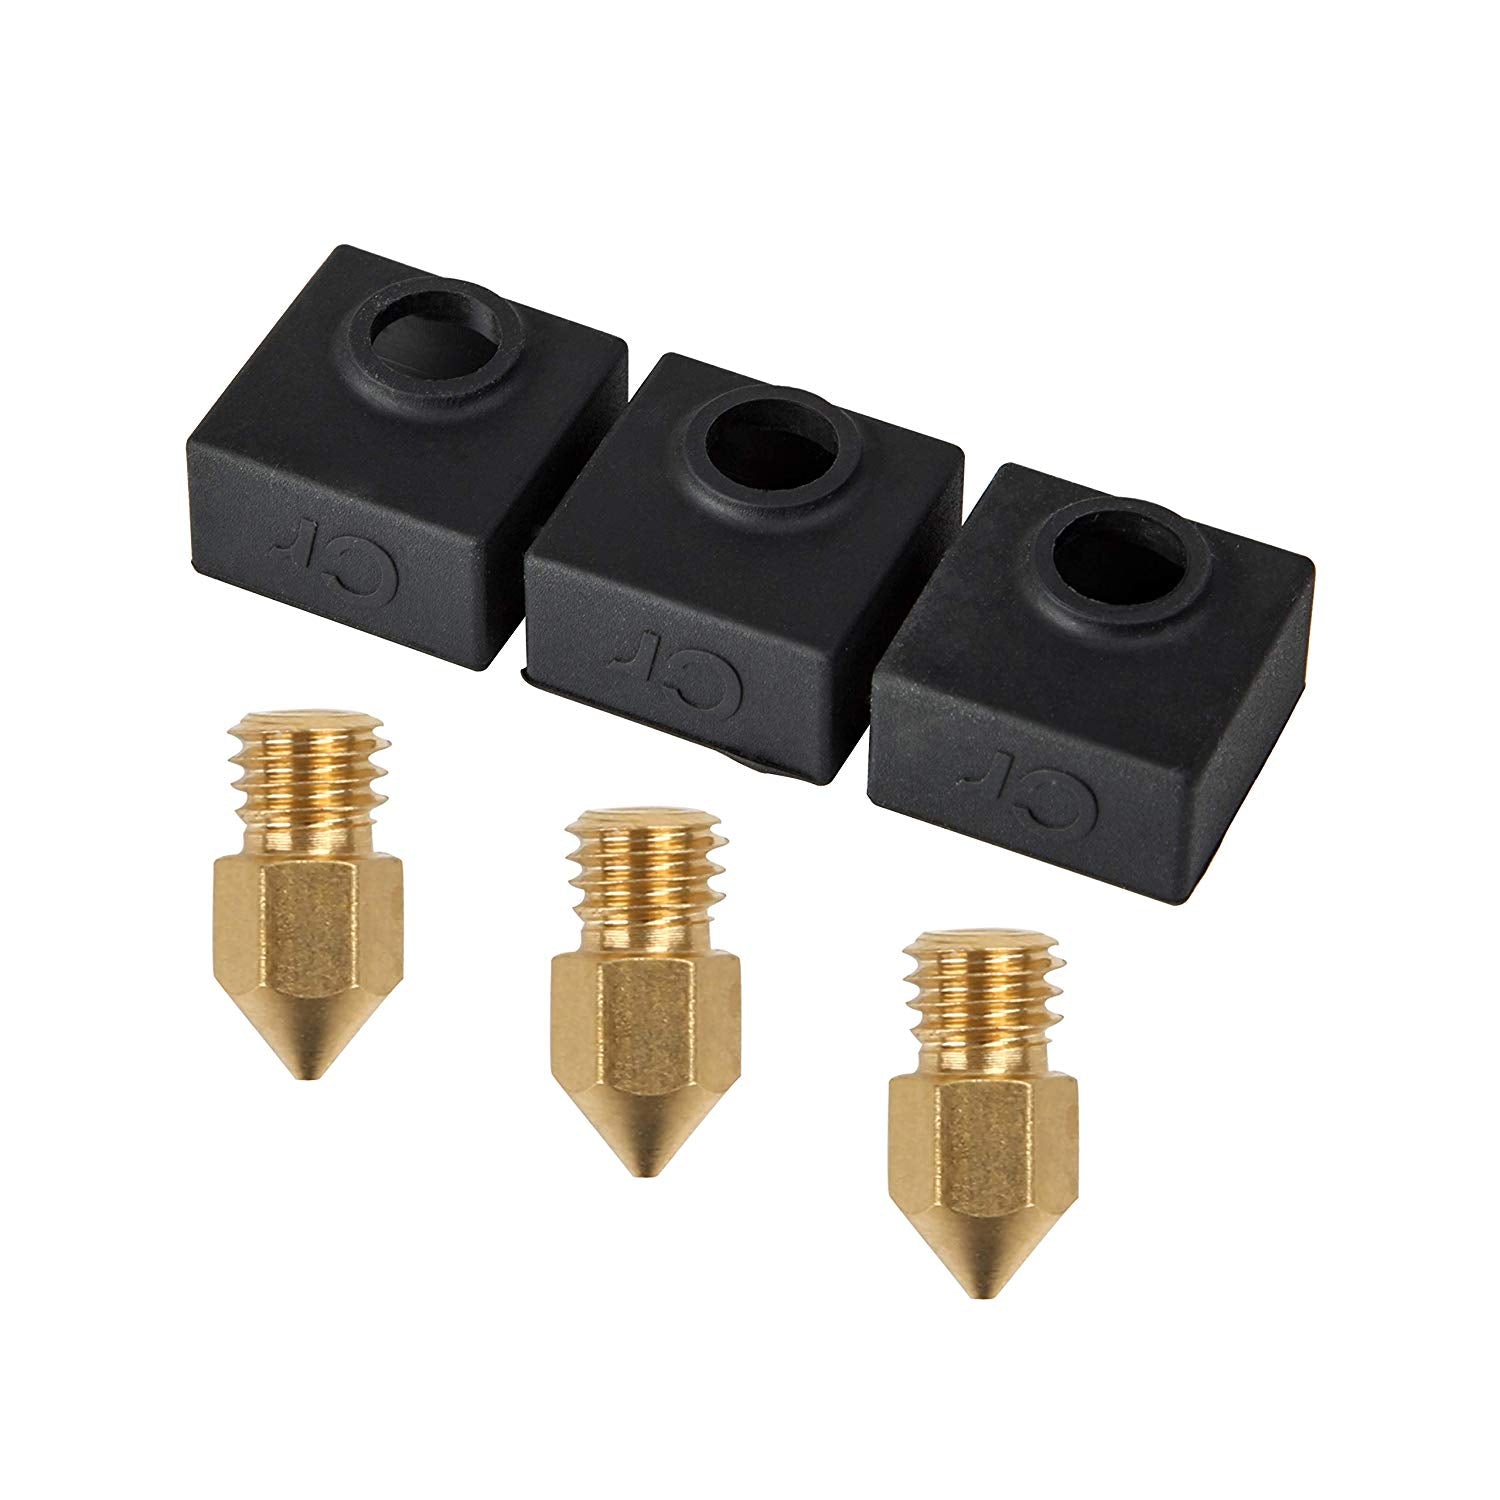 3Pcs MK8 Extruder Nozzle with Heater Block Silicone Cover